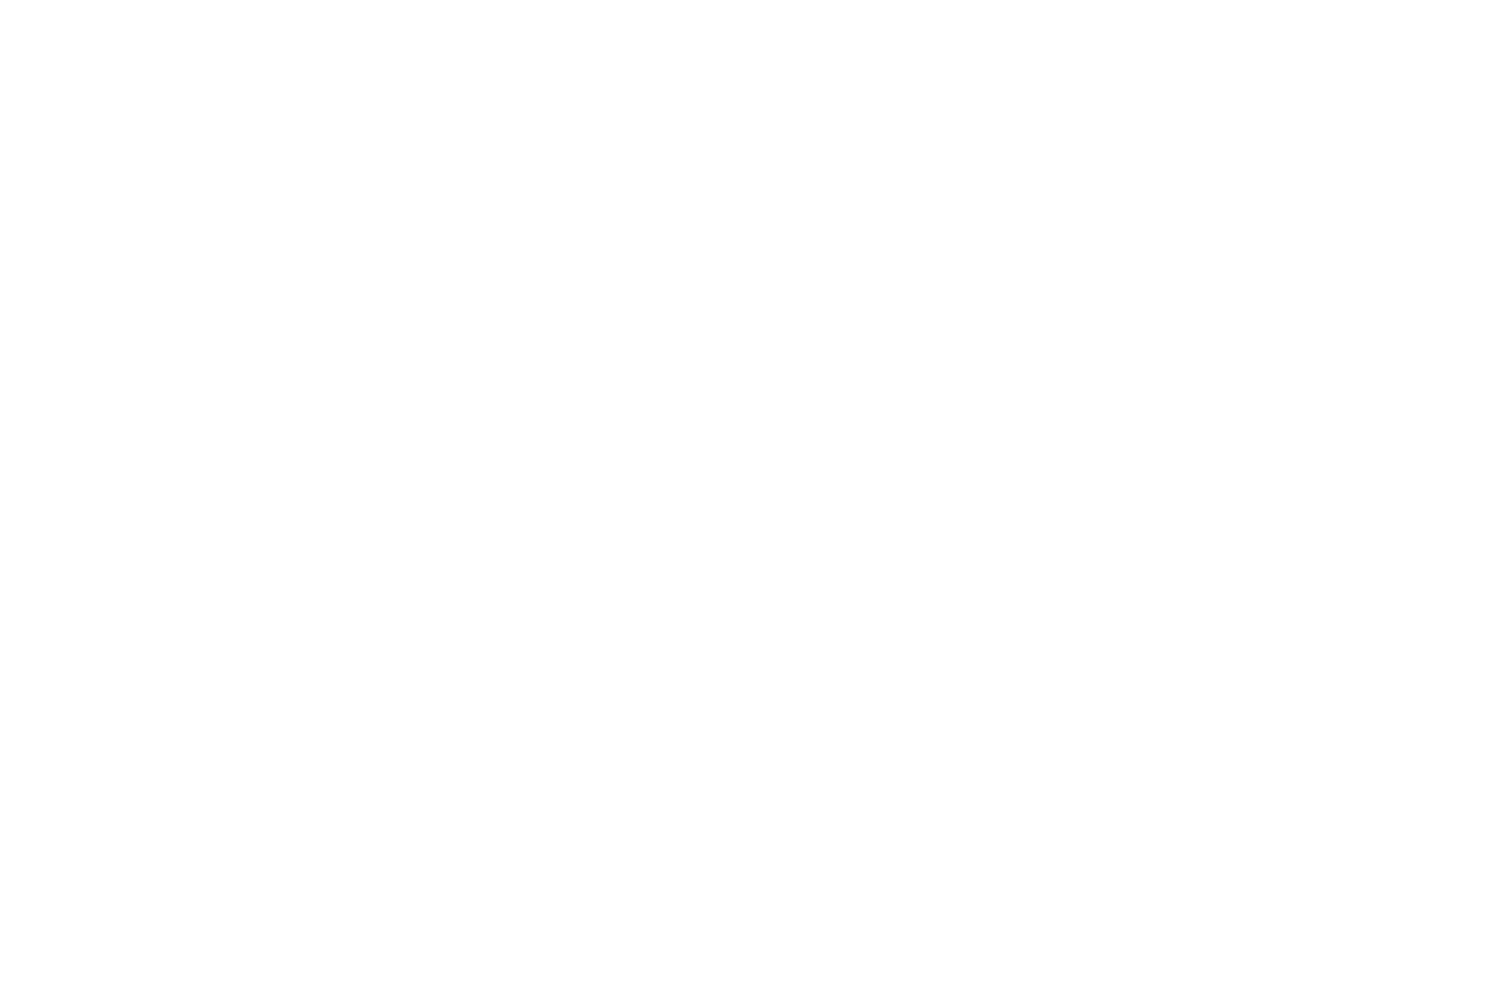 Grizzly Entertainment